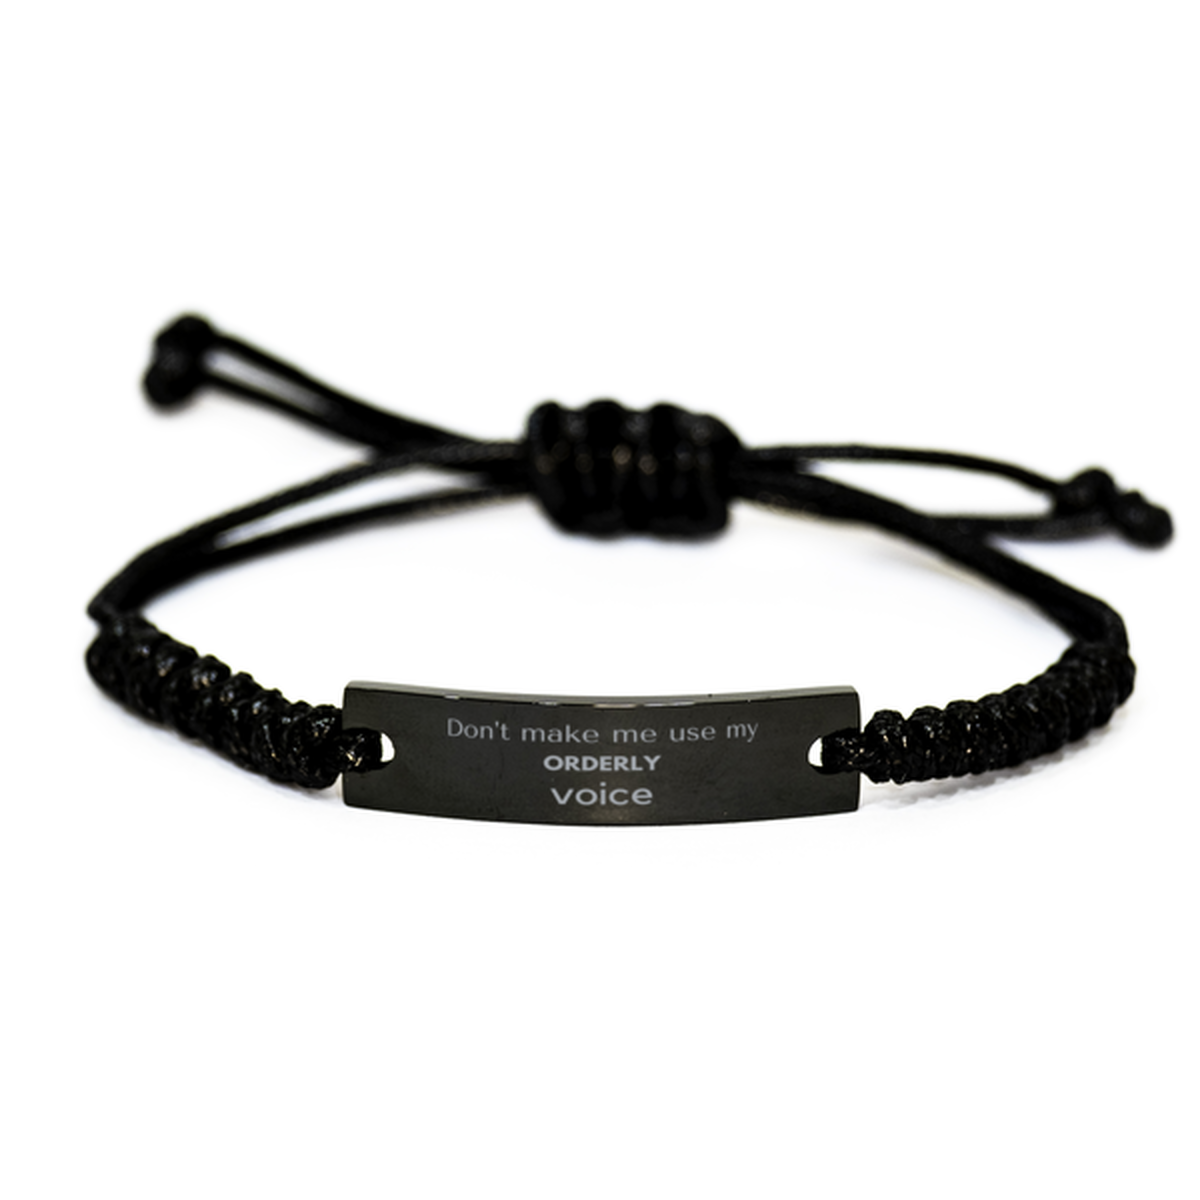 Don't make me use my Orderly voice, Sarcasm Orderly Gifts, Christmas Orderly Black Rope Bracelet Birthday Unique Gifts For Orderly Coworkers, Men, Women, Colleague, Friends